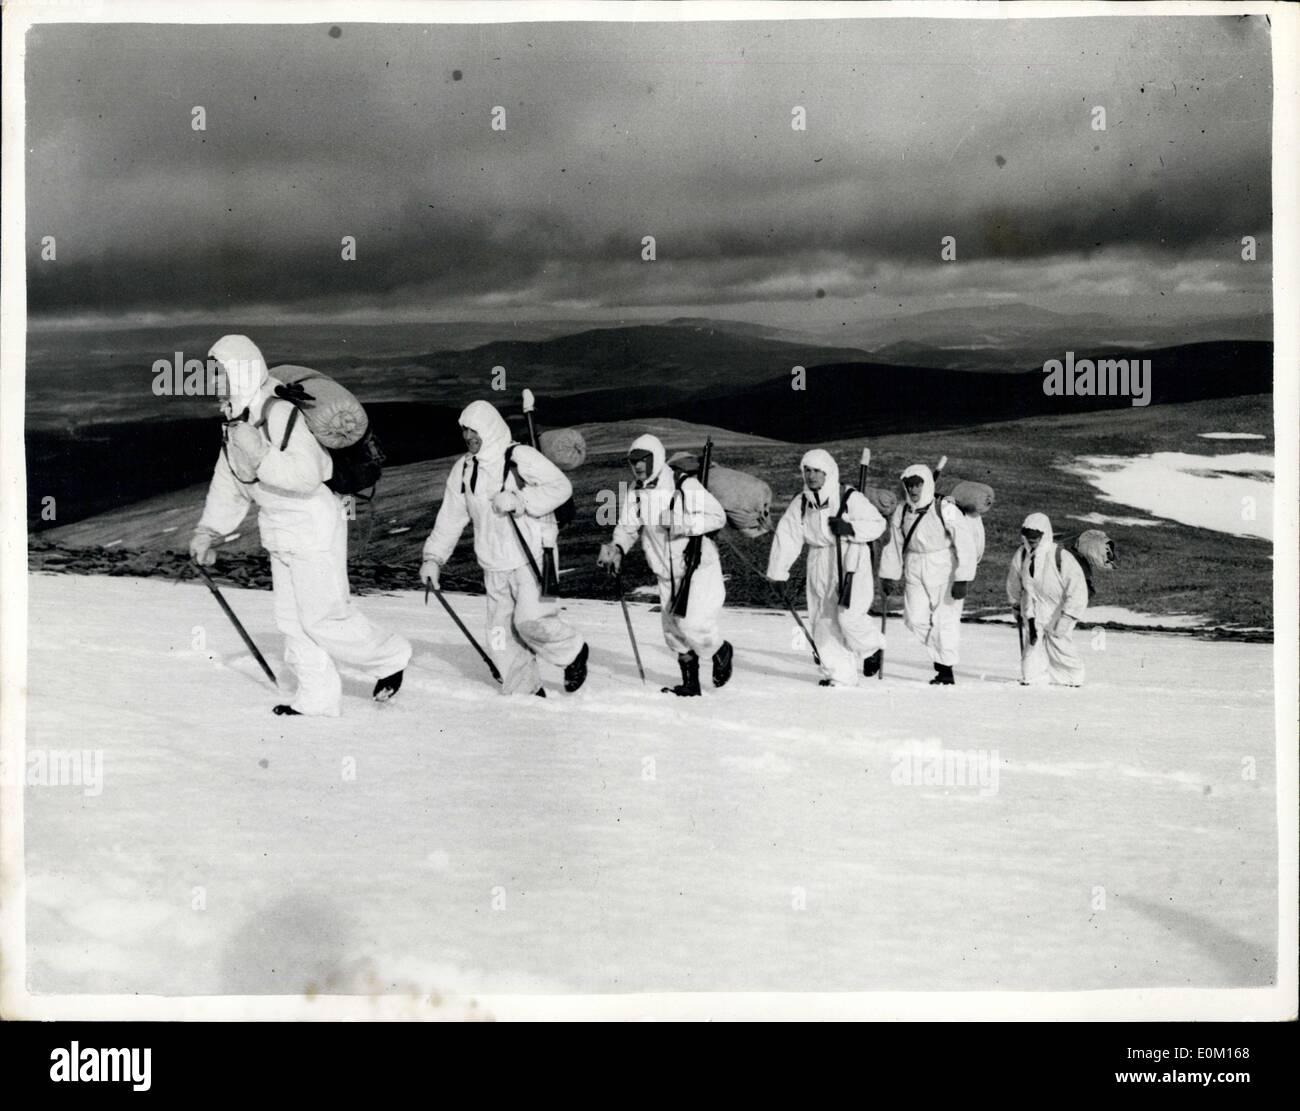 Mar. 03, 1953 - Royal Marine Commando Winter Warfare training course in the snows of the Cairngorm mountains: The bitterly cold Stock Photo